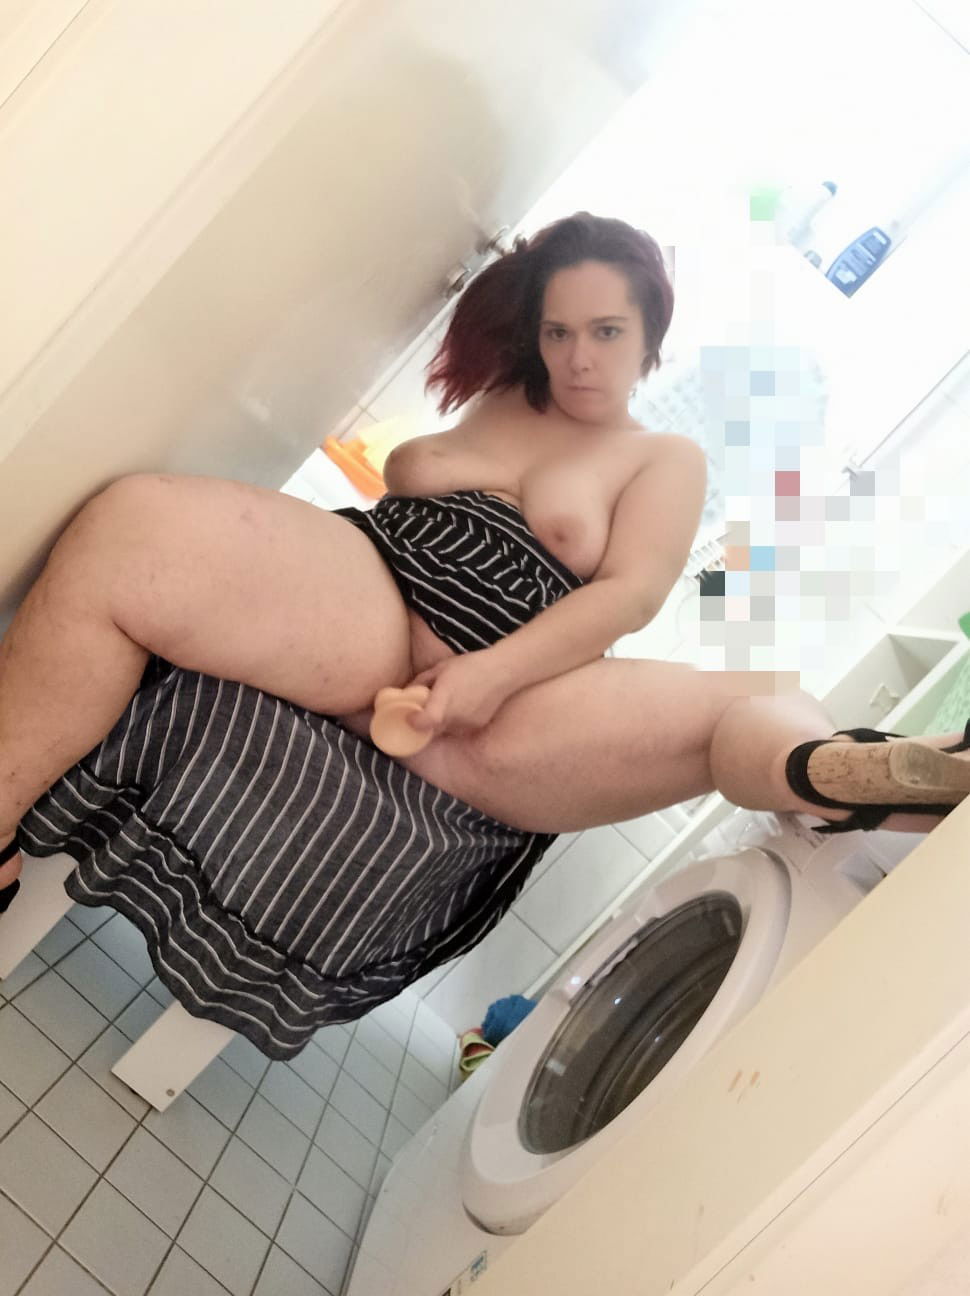 Watch the Photo by SubWife85 with the username @SubWife85, who is a verified user, posted on November 3, 2020 and the text says 'I'm a nasty little marriage pussy'